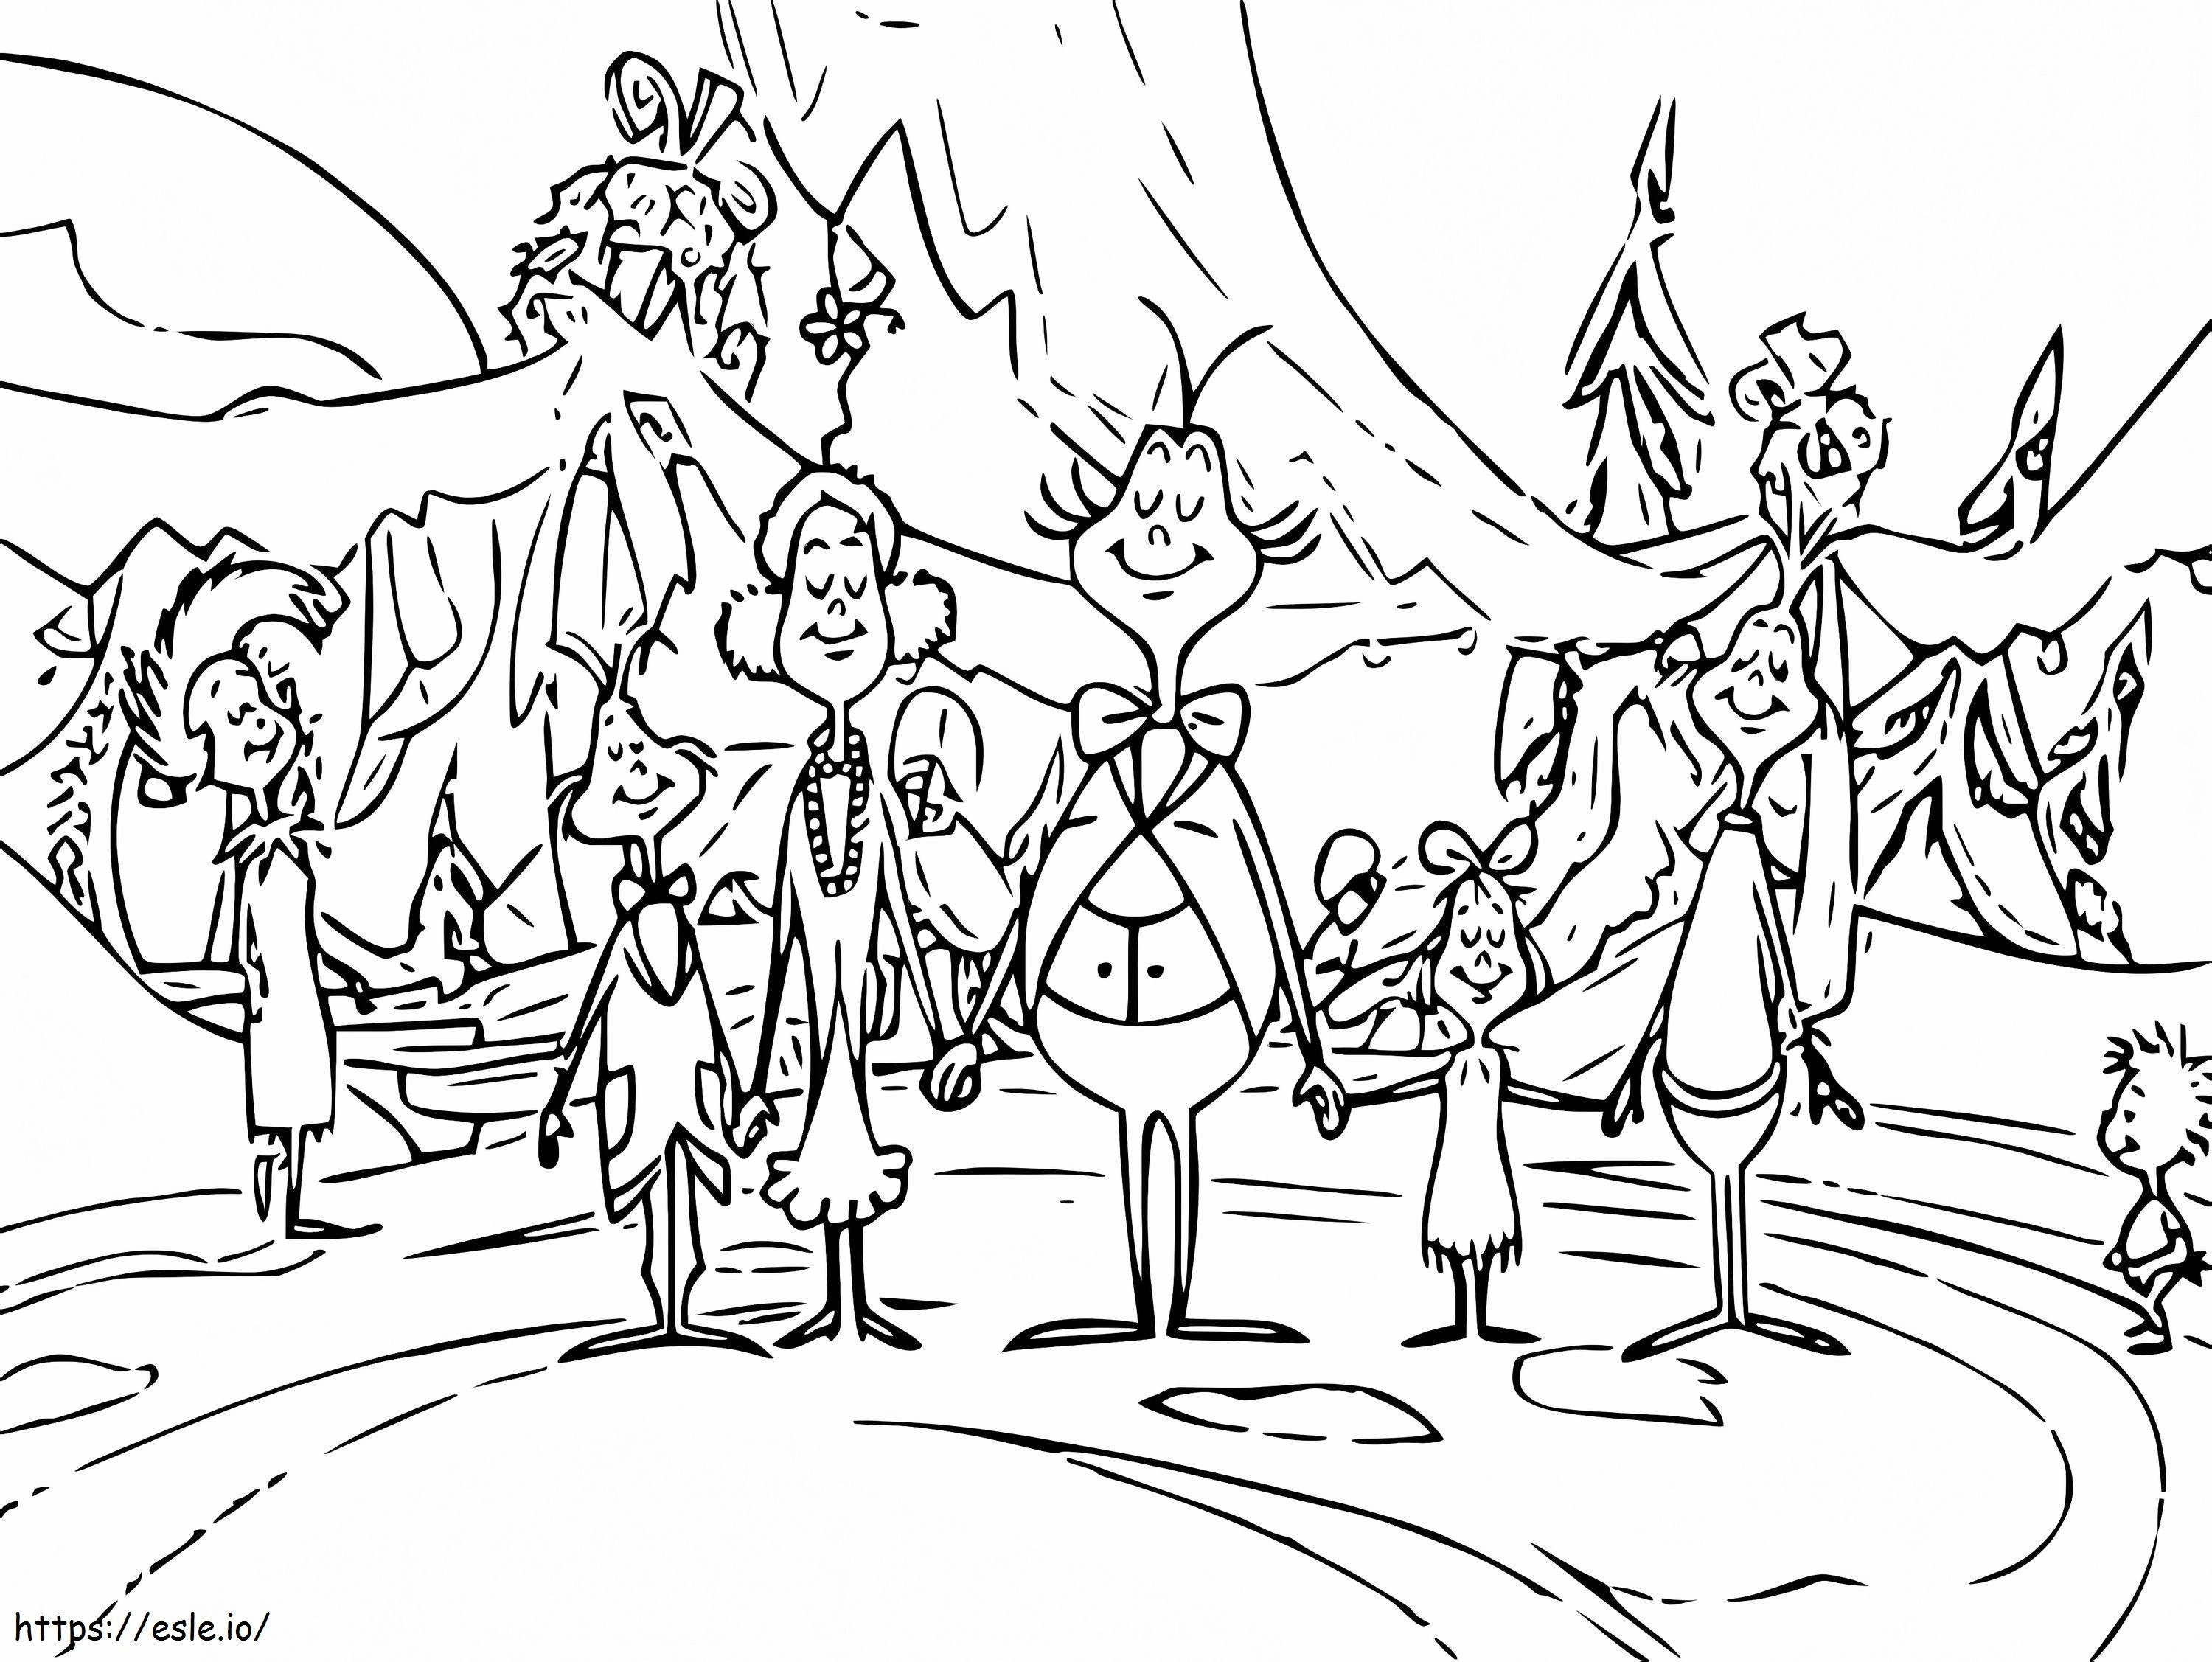 Whoville Characters coloring page